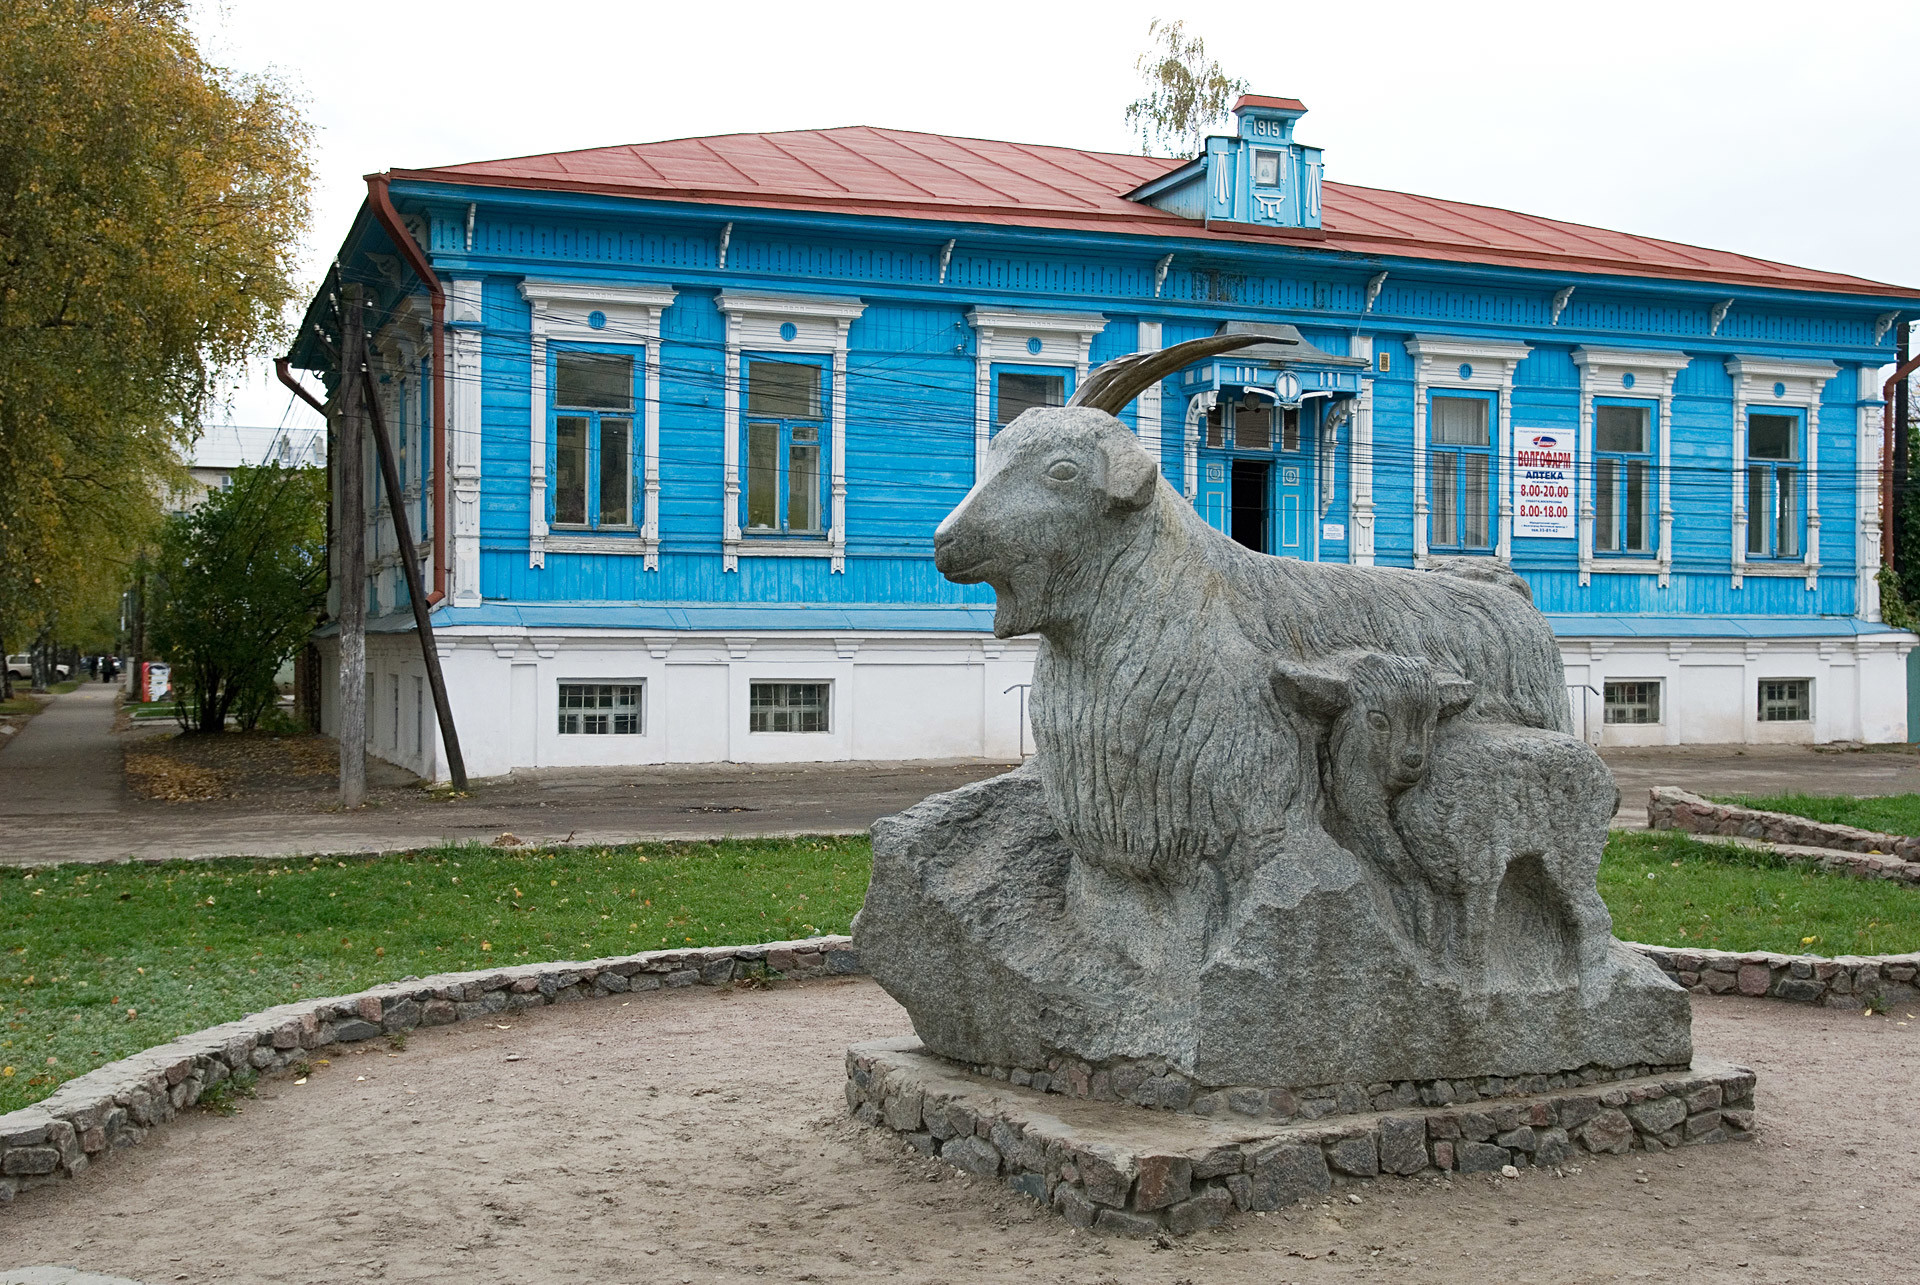 The monument to a goat in Uryupinsk